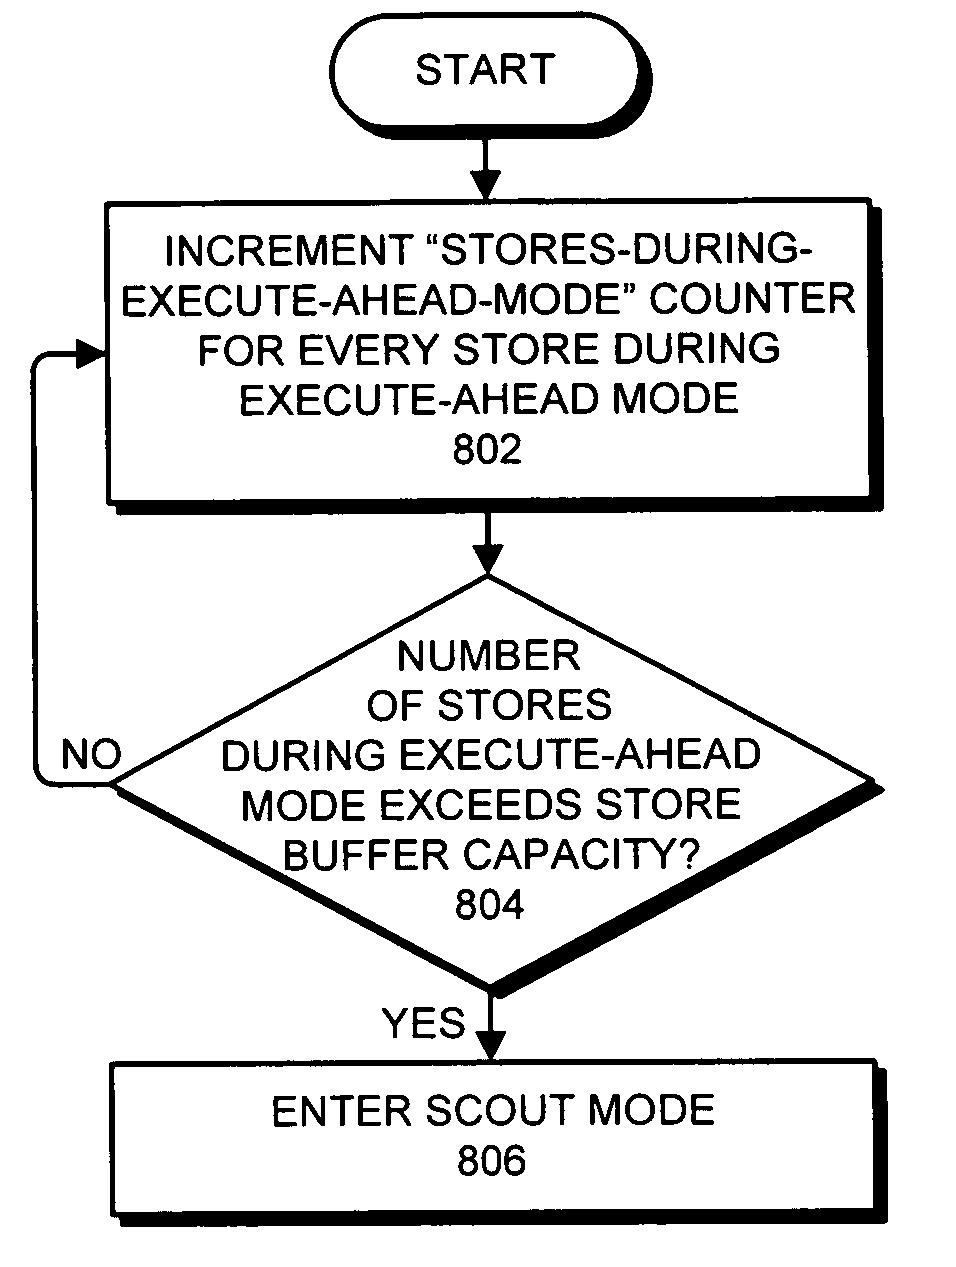 Entering scout-mode when stores encountered during execute-ahead mode exceed the capacity of the store buffer